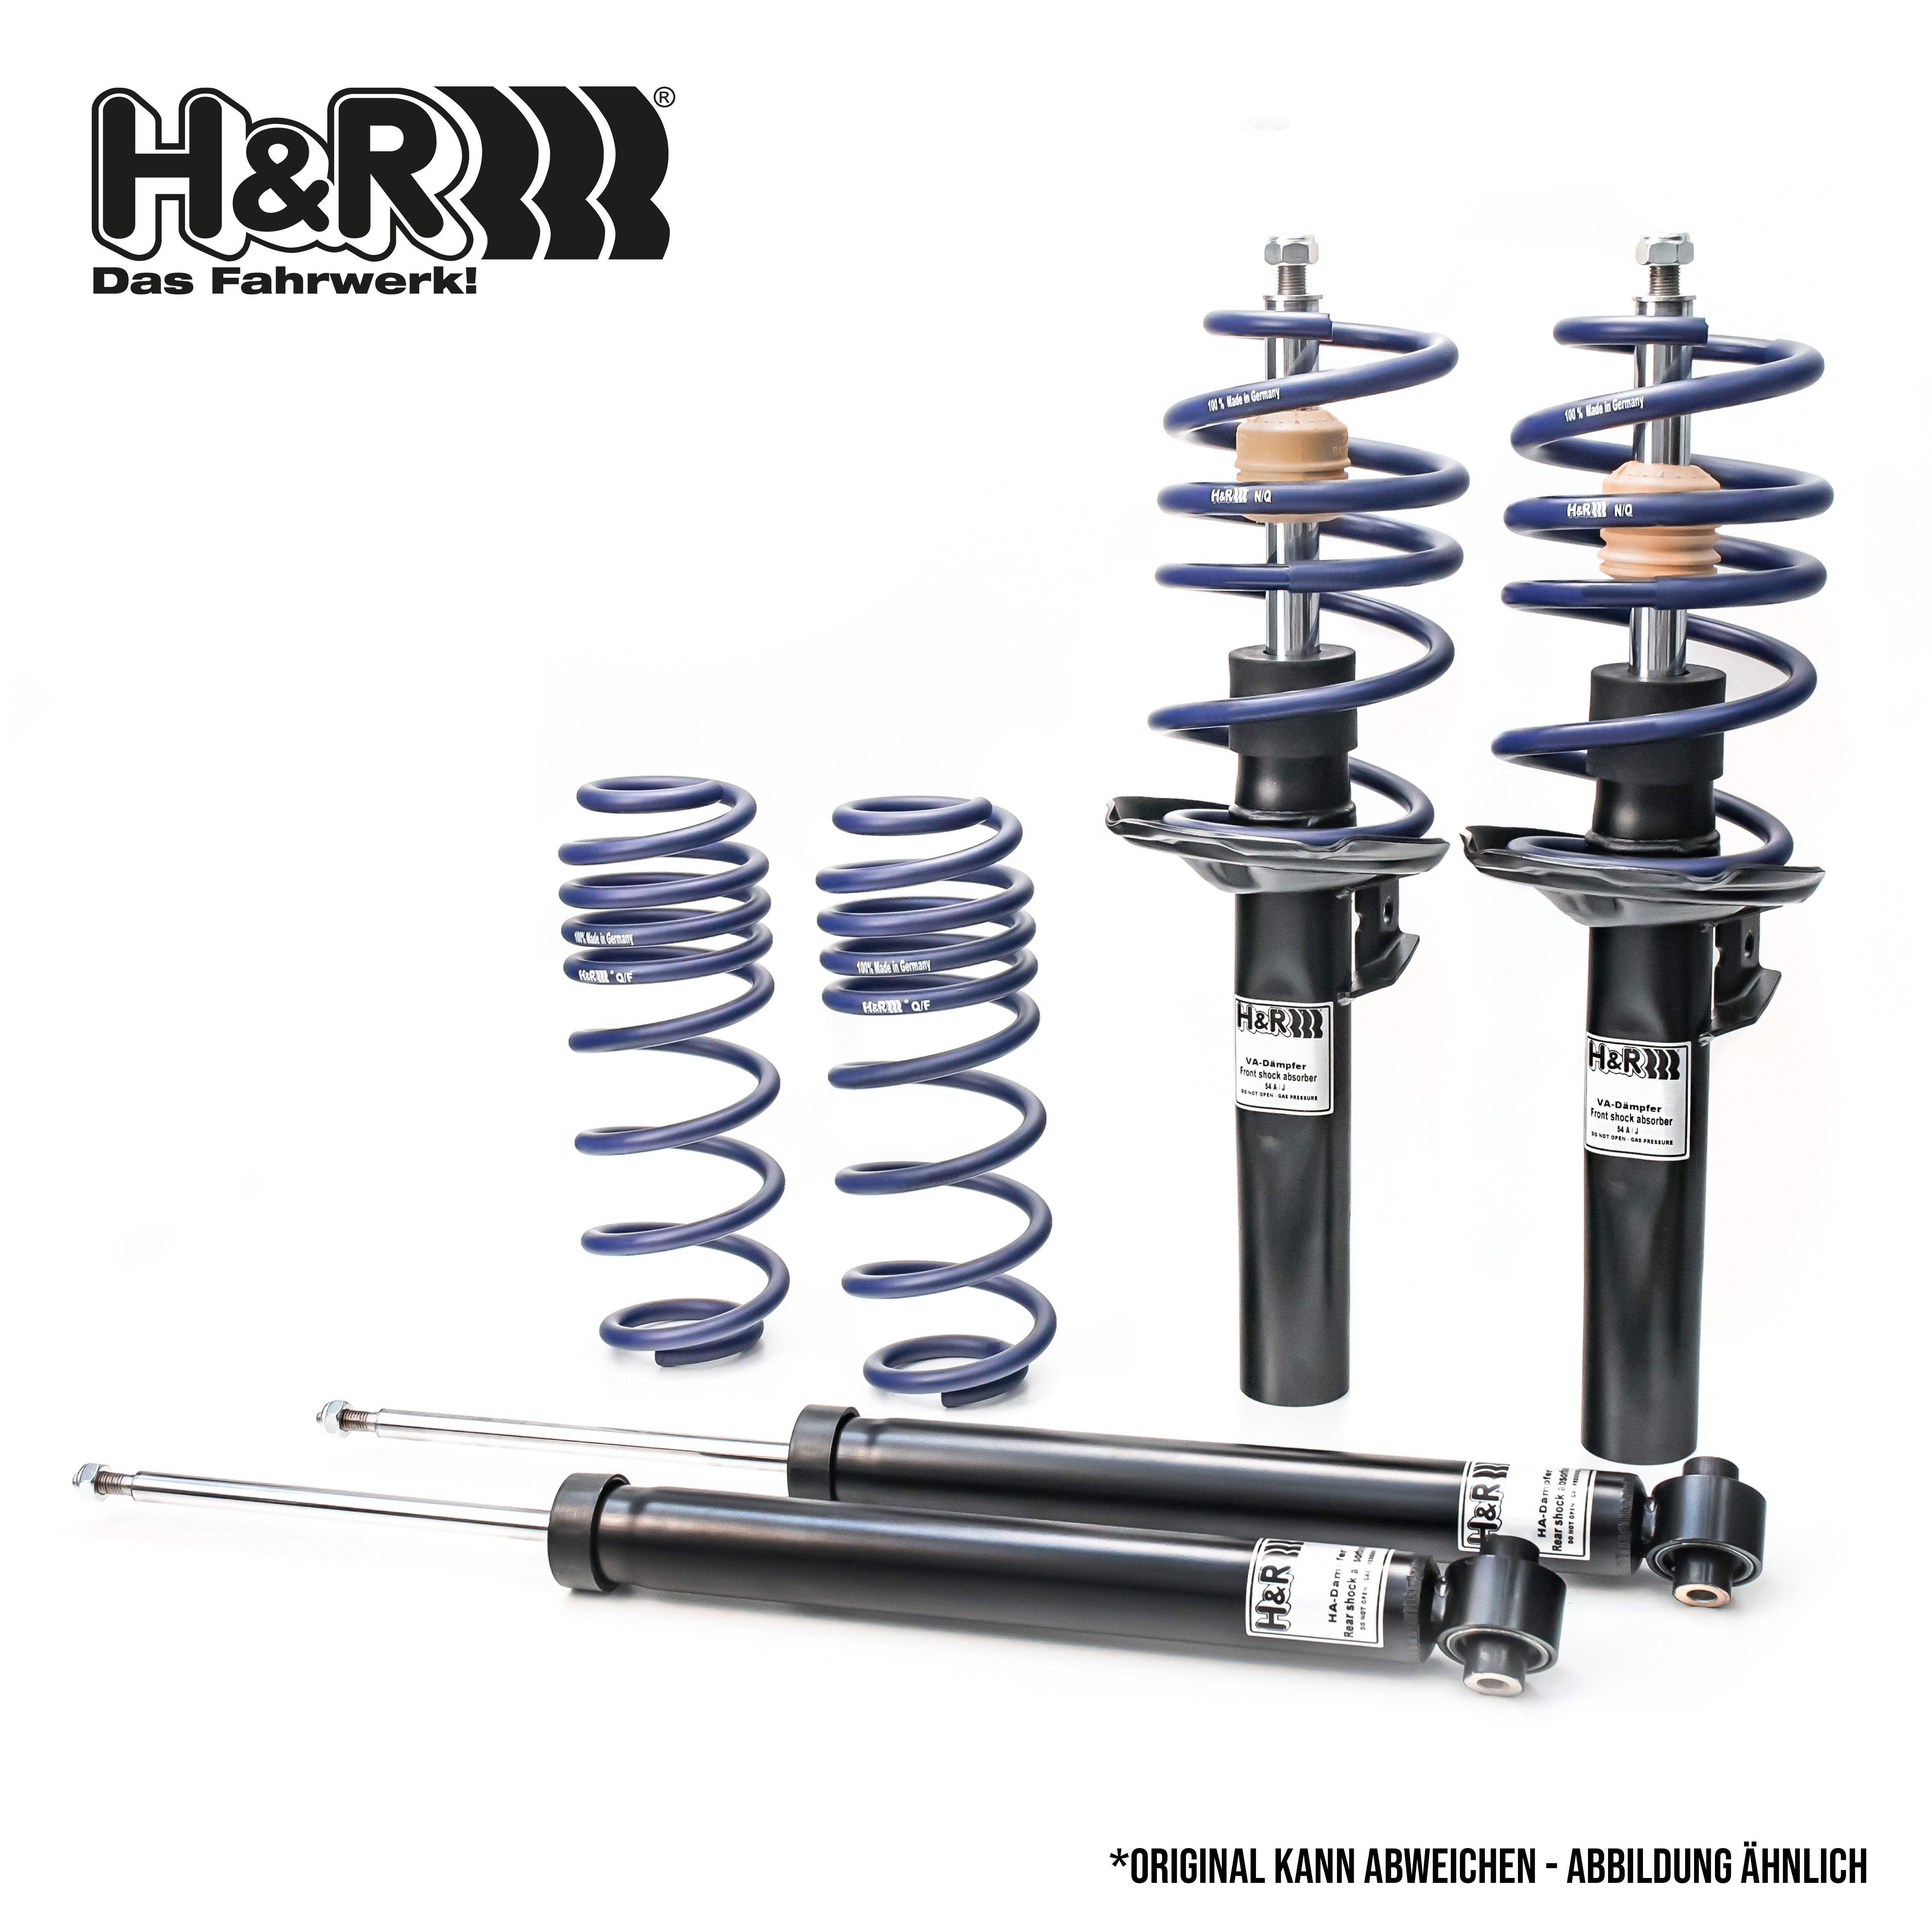 Volkswagen Suspension Kit, coil springs / shock absorbers H&R 40527-1 at a good price